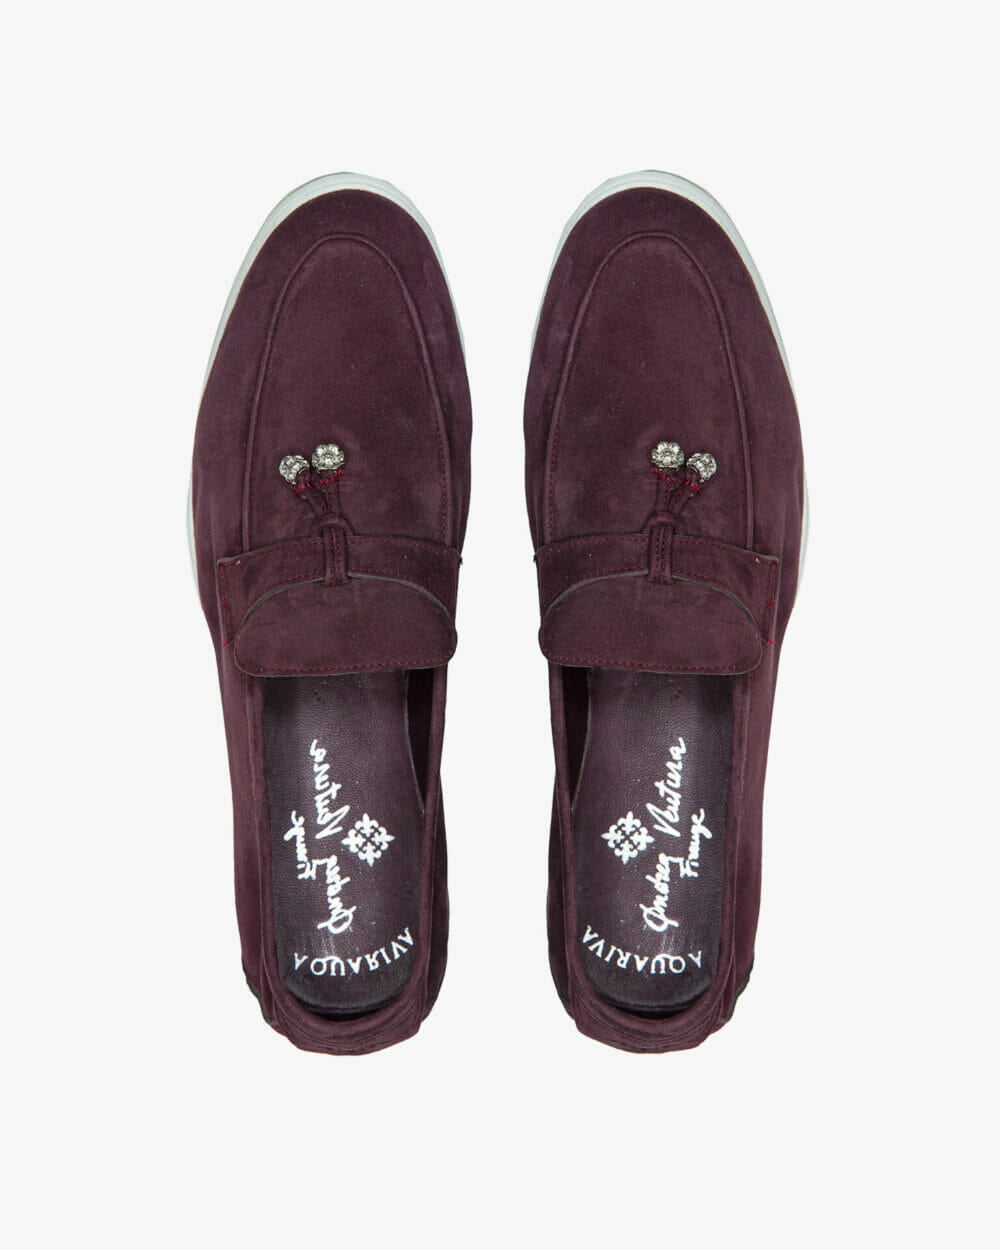 Aq-D-beach-charms1-aubergine-suede-from-above